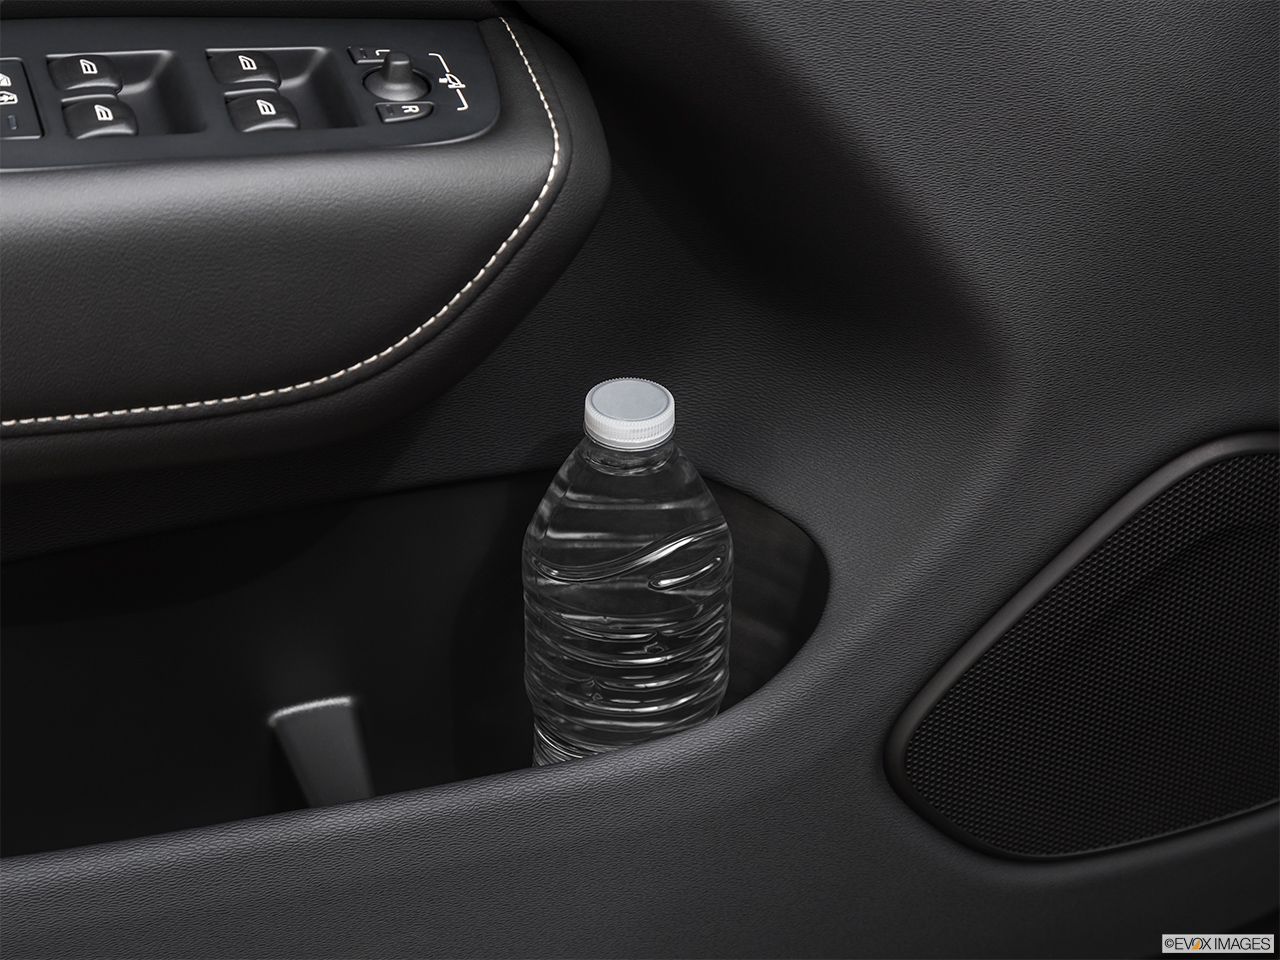 2019 Volvo XC60 T8 R-Design eAWD Plug-in Hybrid Cup holder prop (tertiary). 